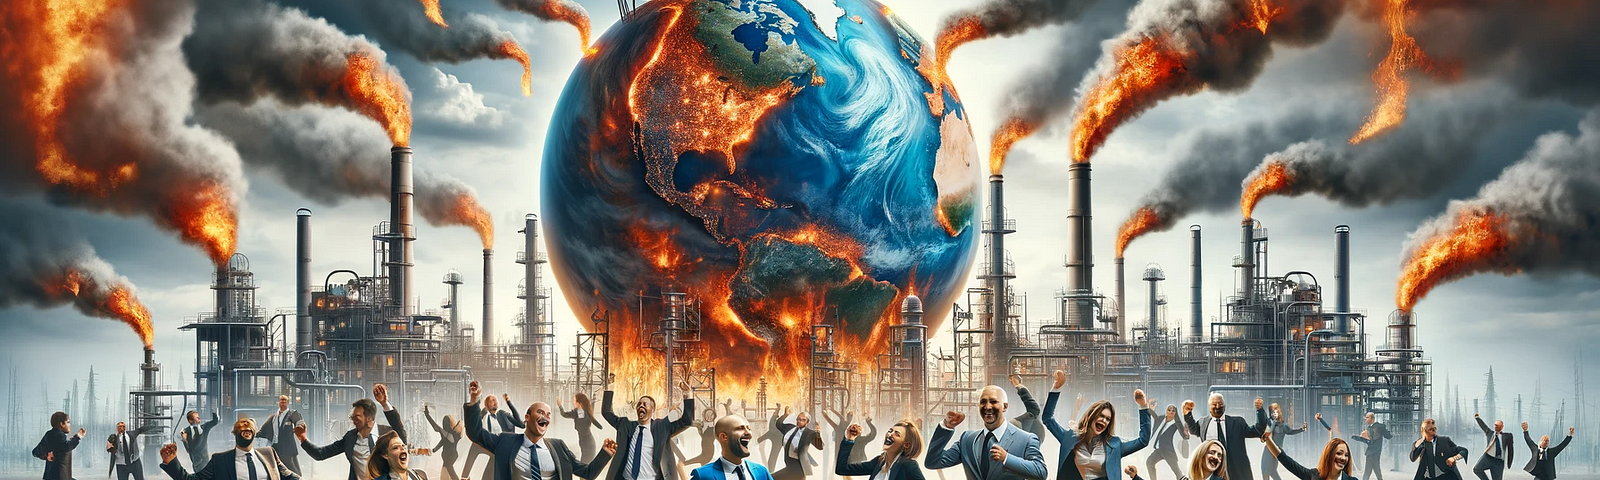 ChatGPT & DALL-E generated panoramic image depicting oil and gas business people dancing joyously on a representation of a burning world.